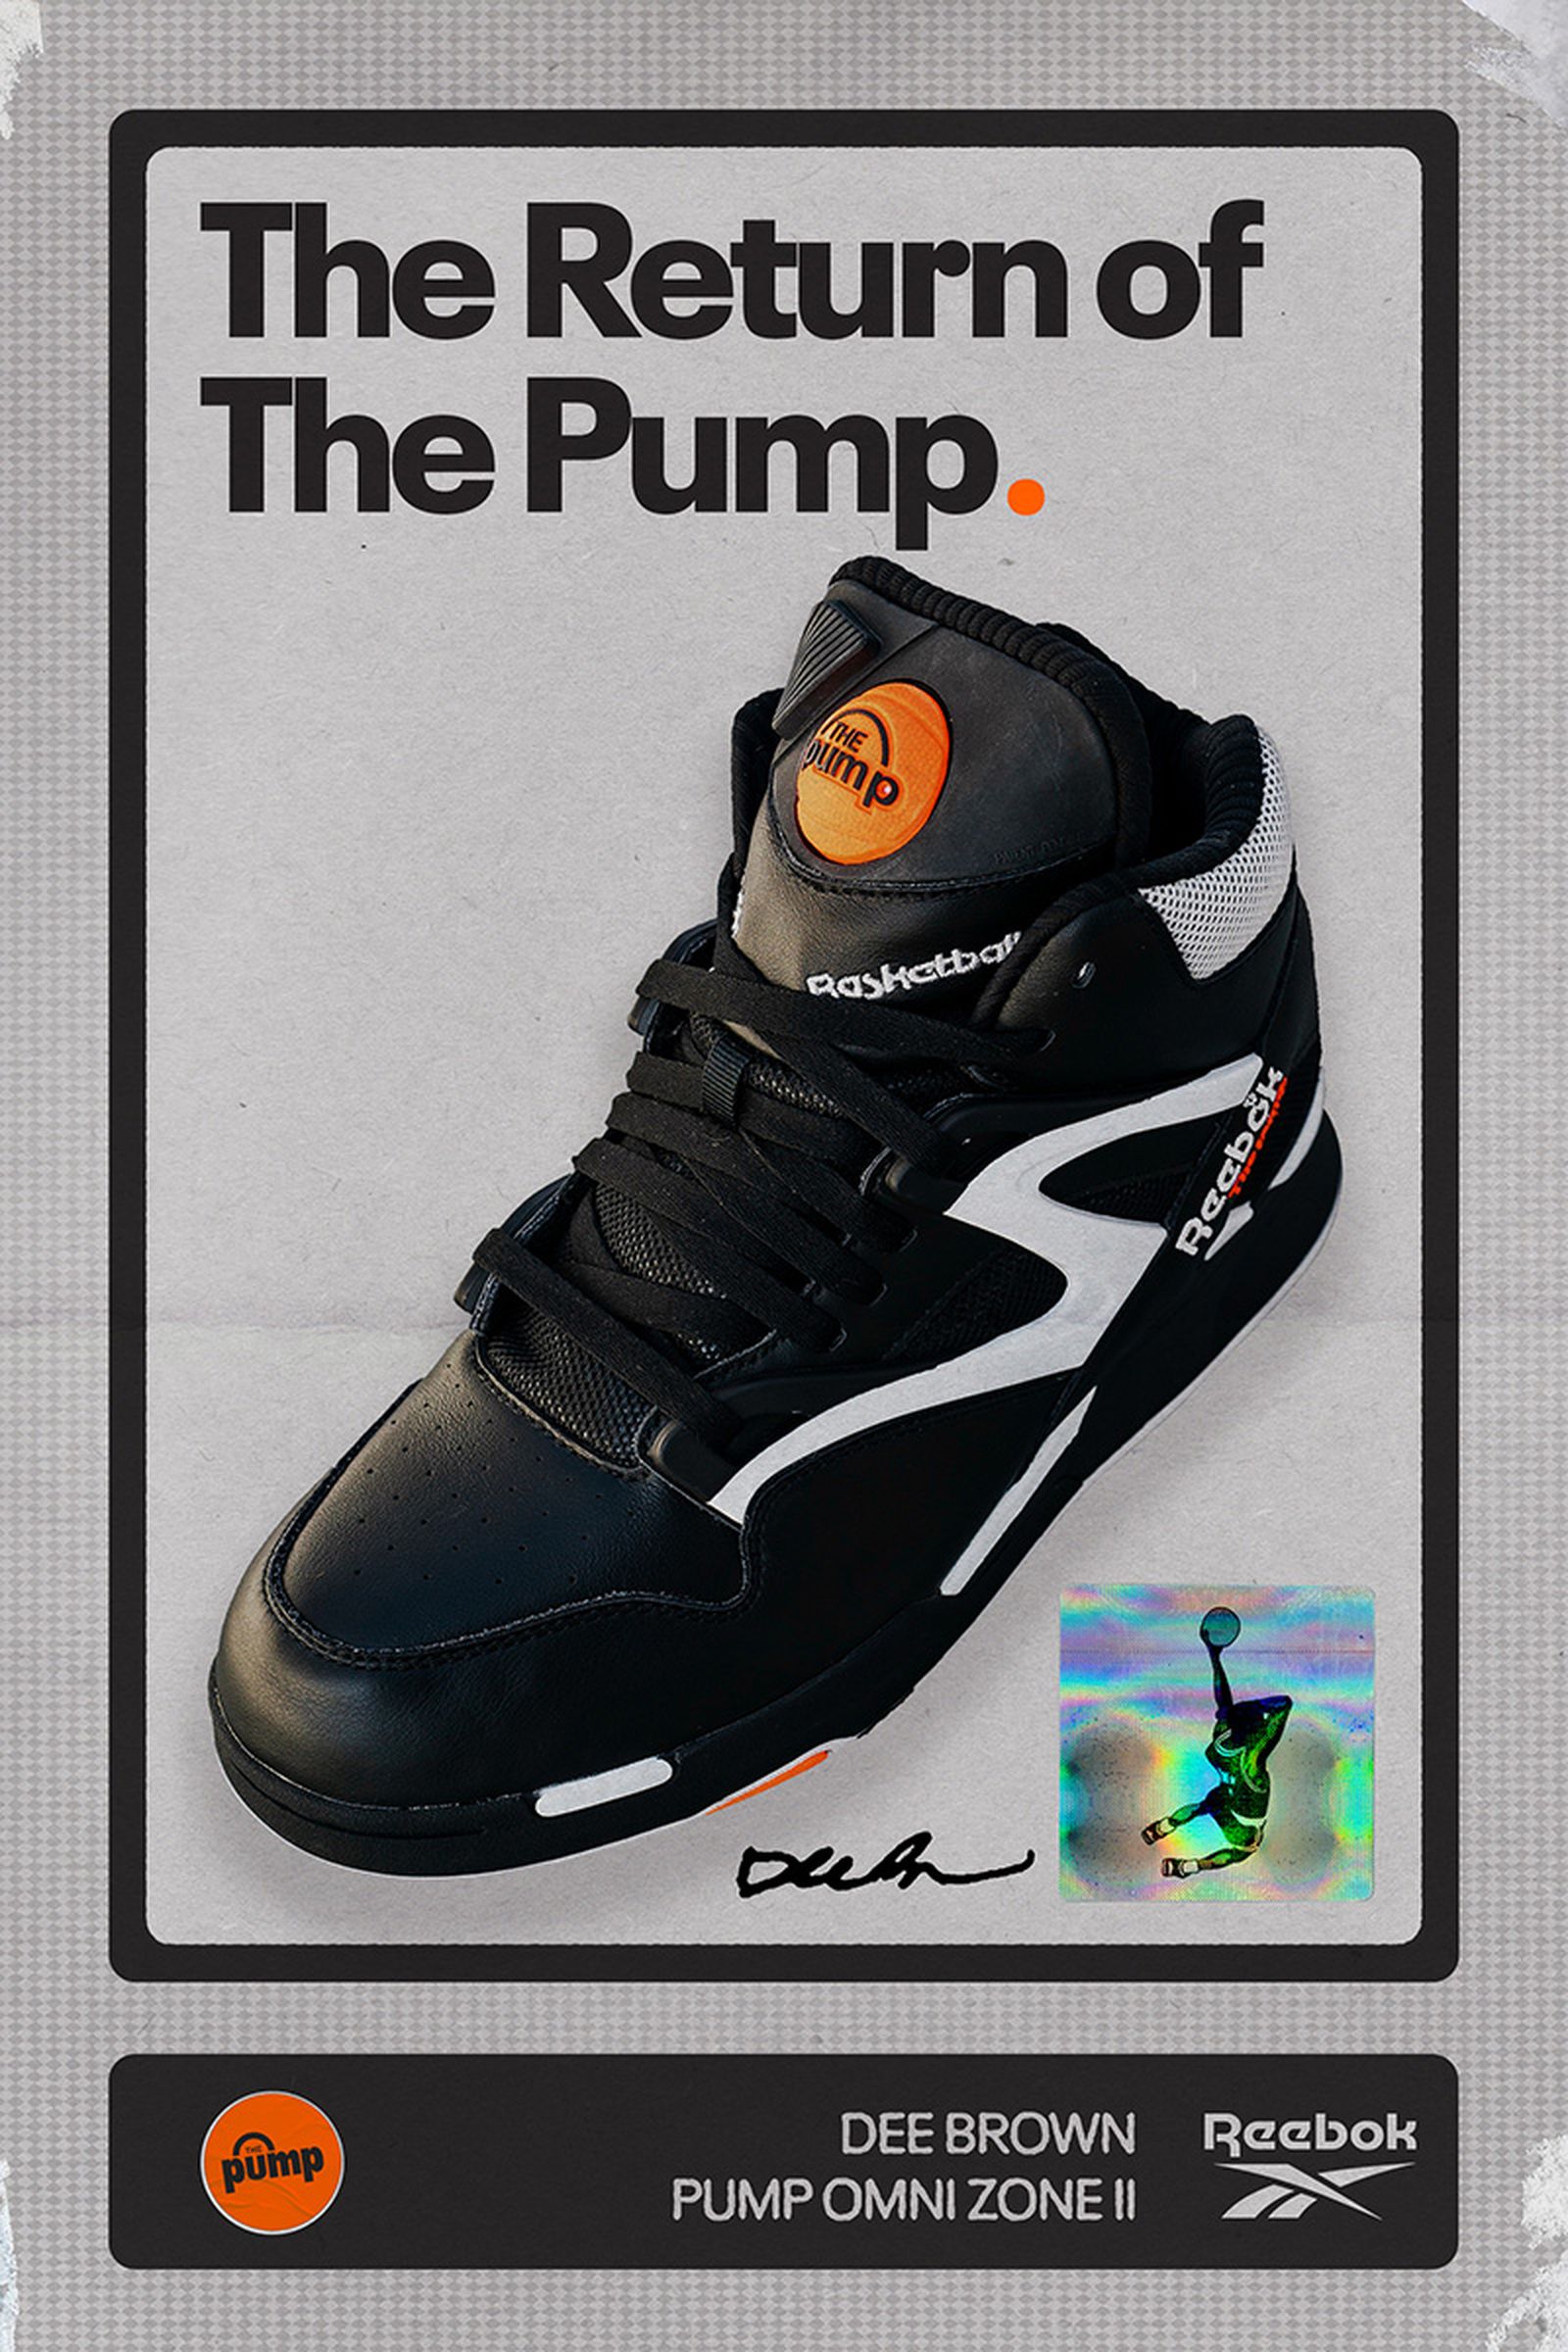 When Did the Reebok Pumps Come Out?